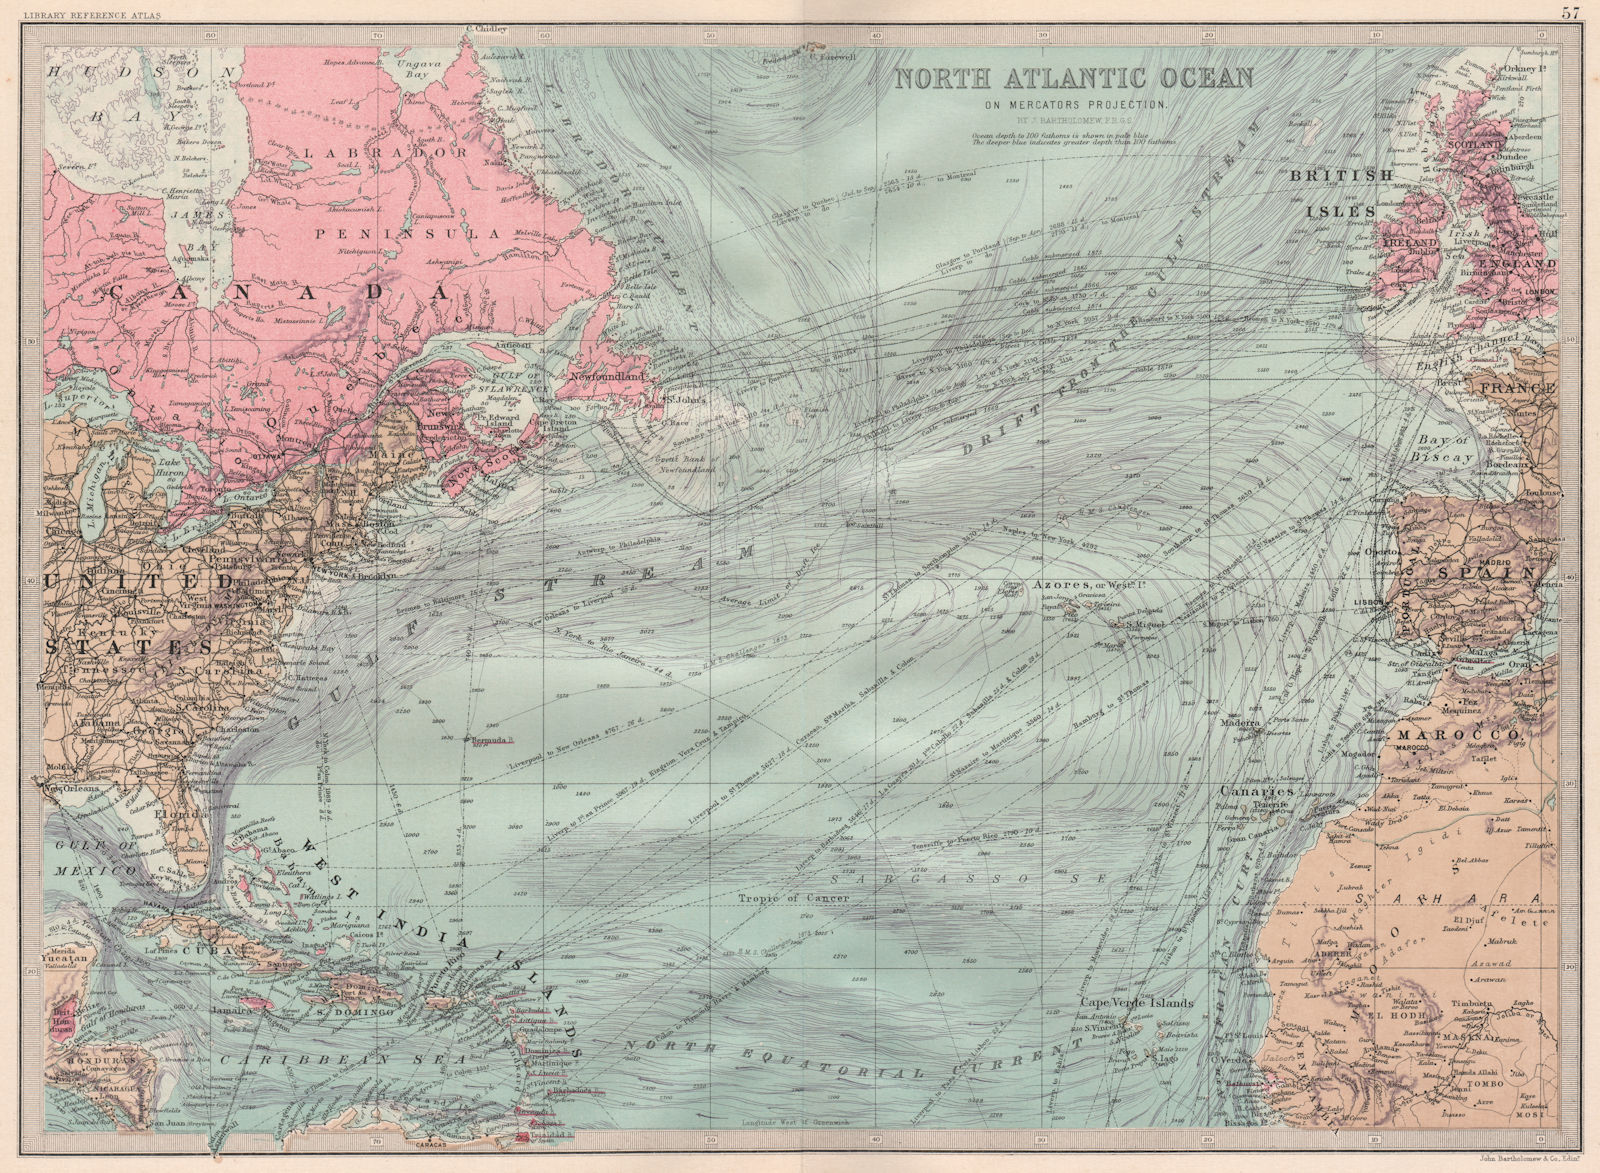 NORTH ATLANTIC. showing shipping routes Telegraph cables ocean currents 1890 map